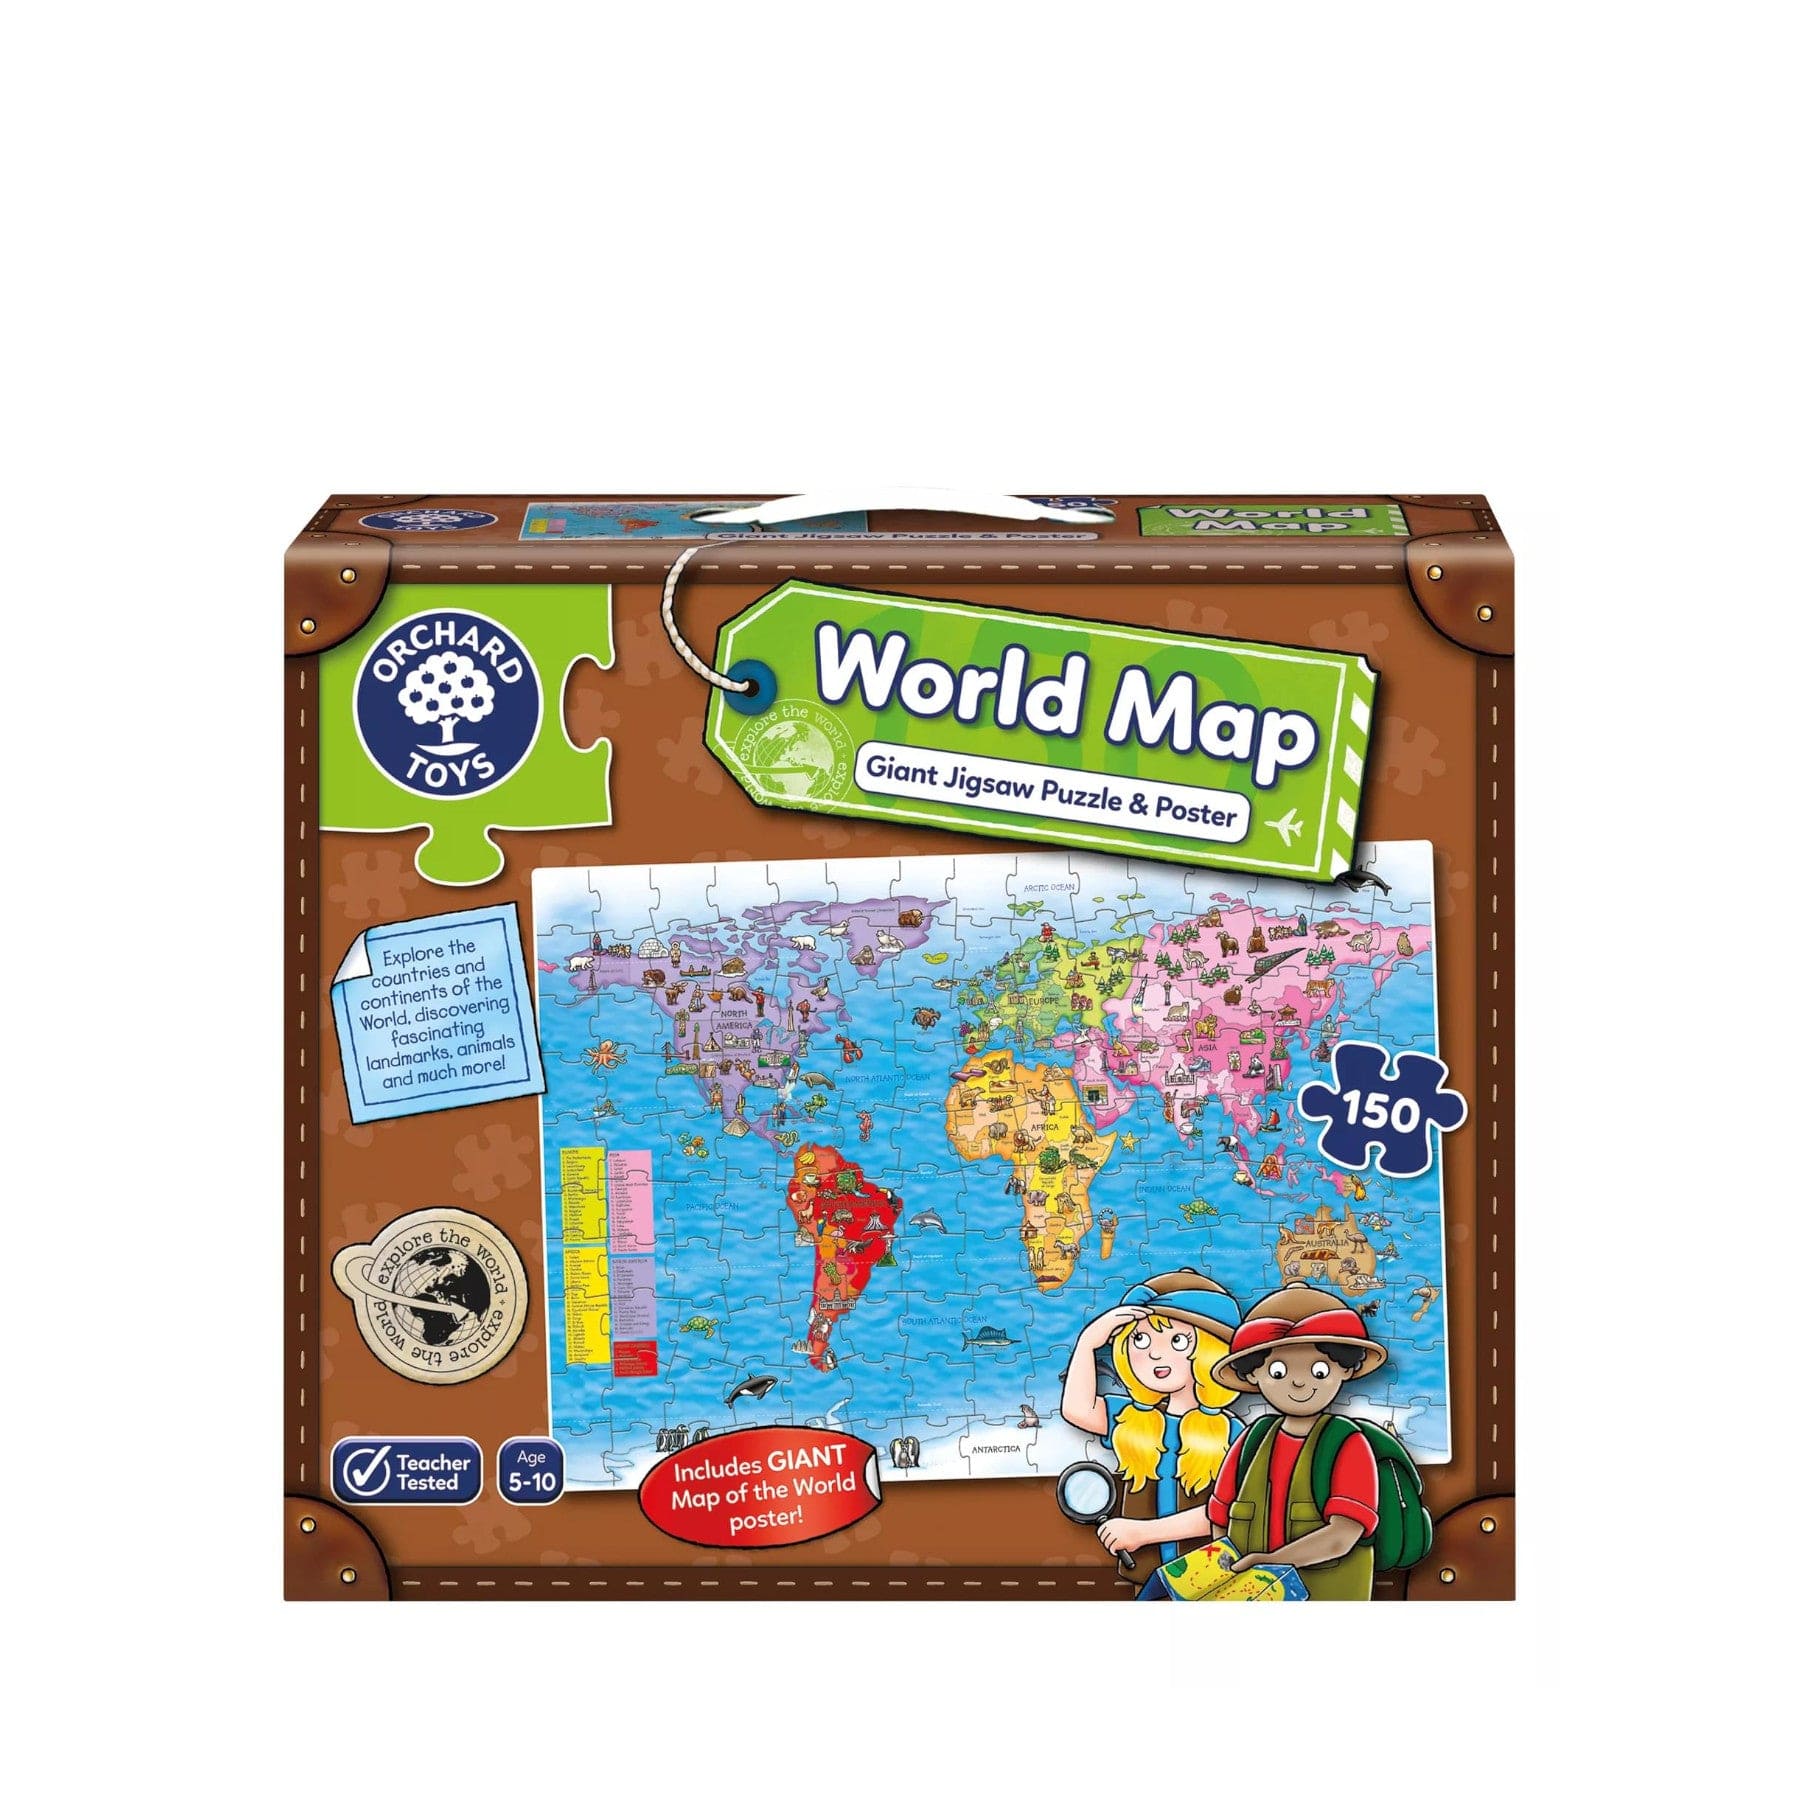 Orchard Toys World Map Giant Jigsaw Puzzle and Poster, educational kids toy, illustrated colorful world map, cartoon characters exploring, puzzle pieces, learning tool for children ages 5-10.